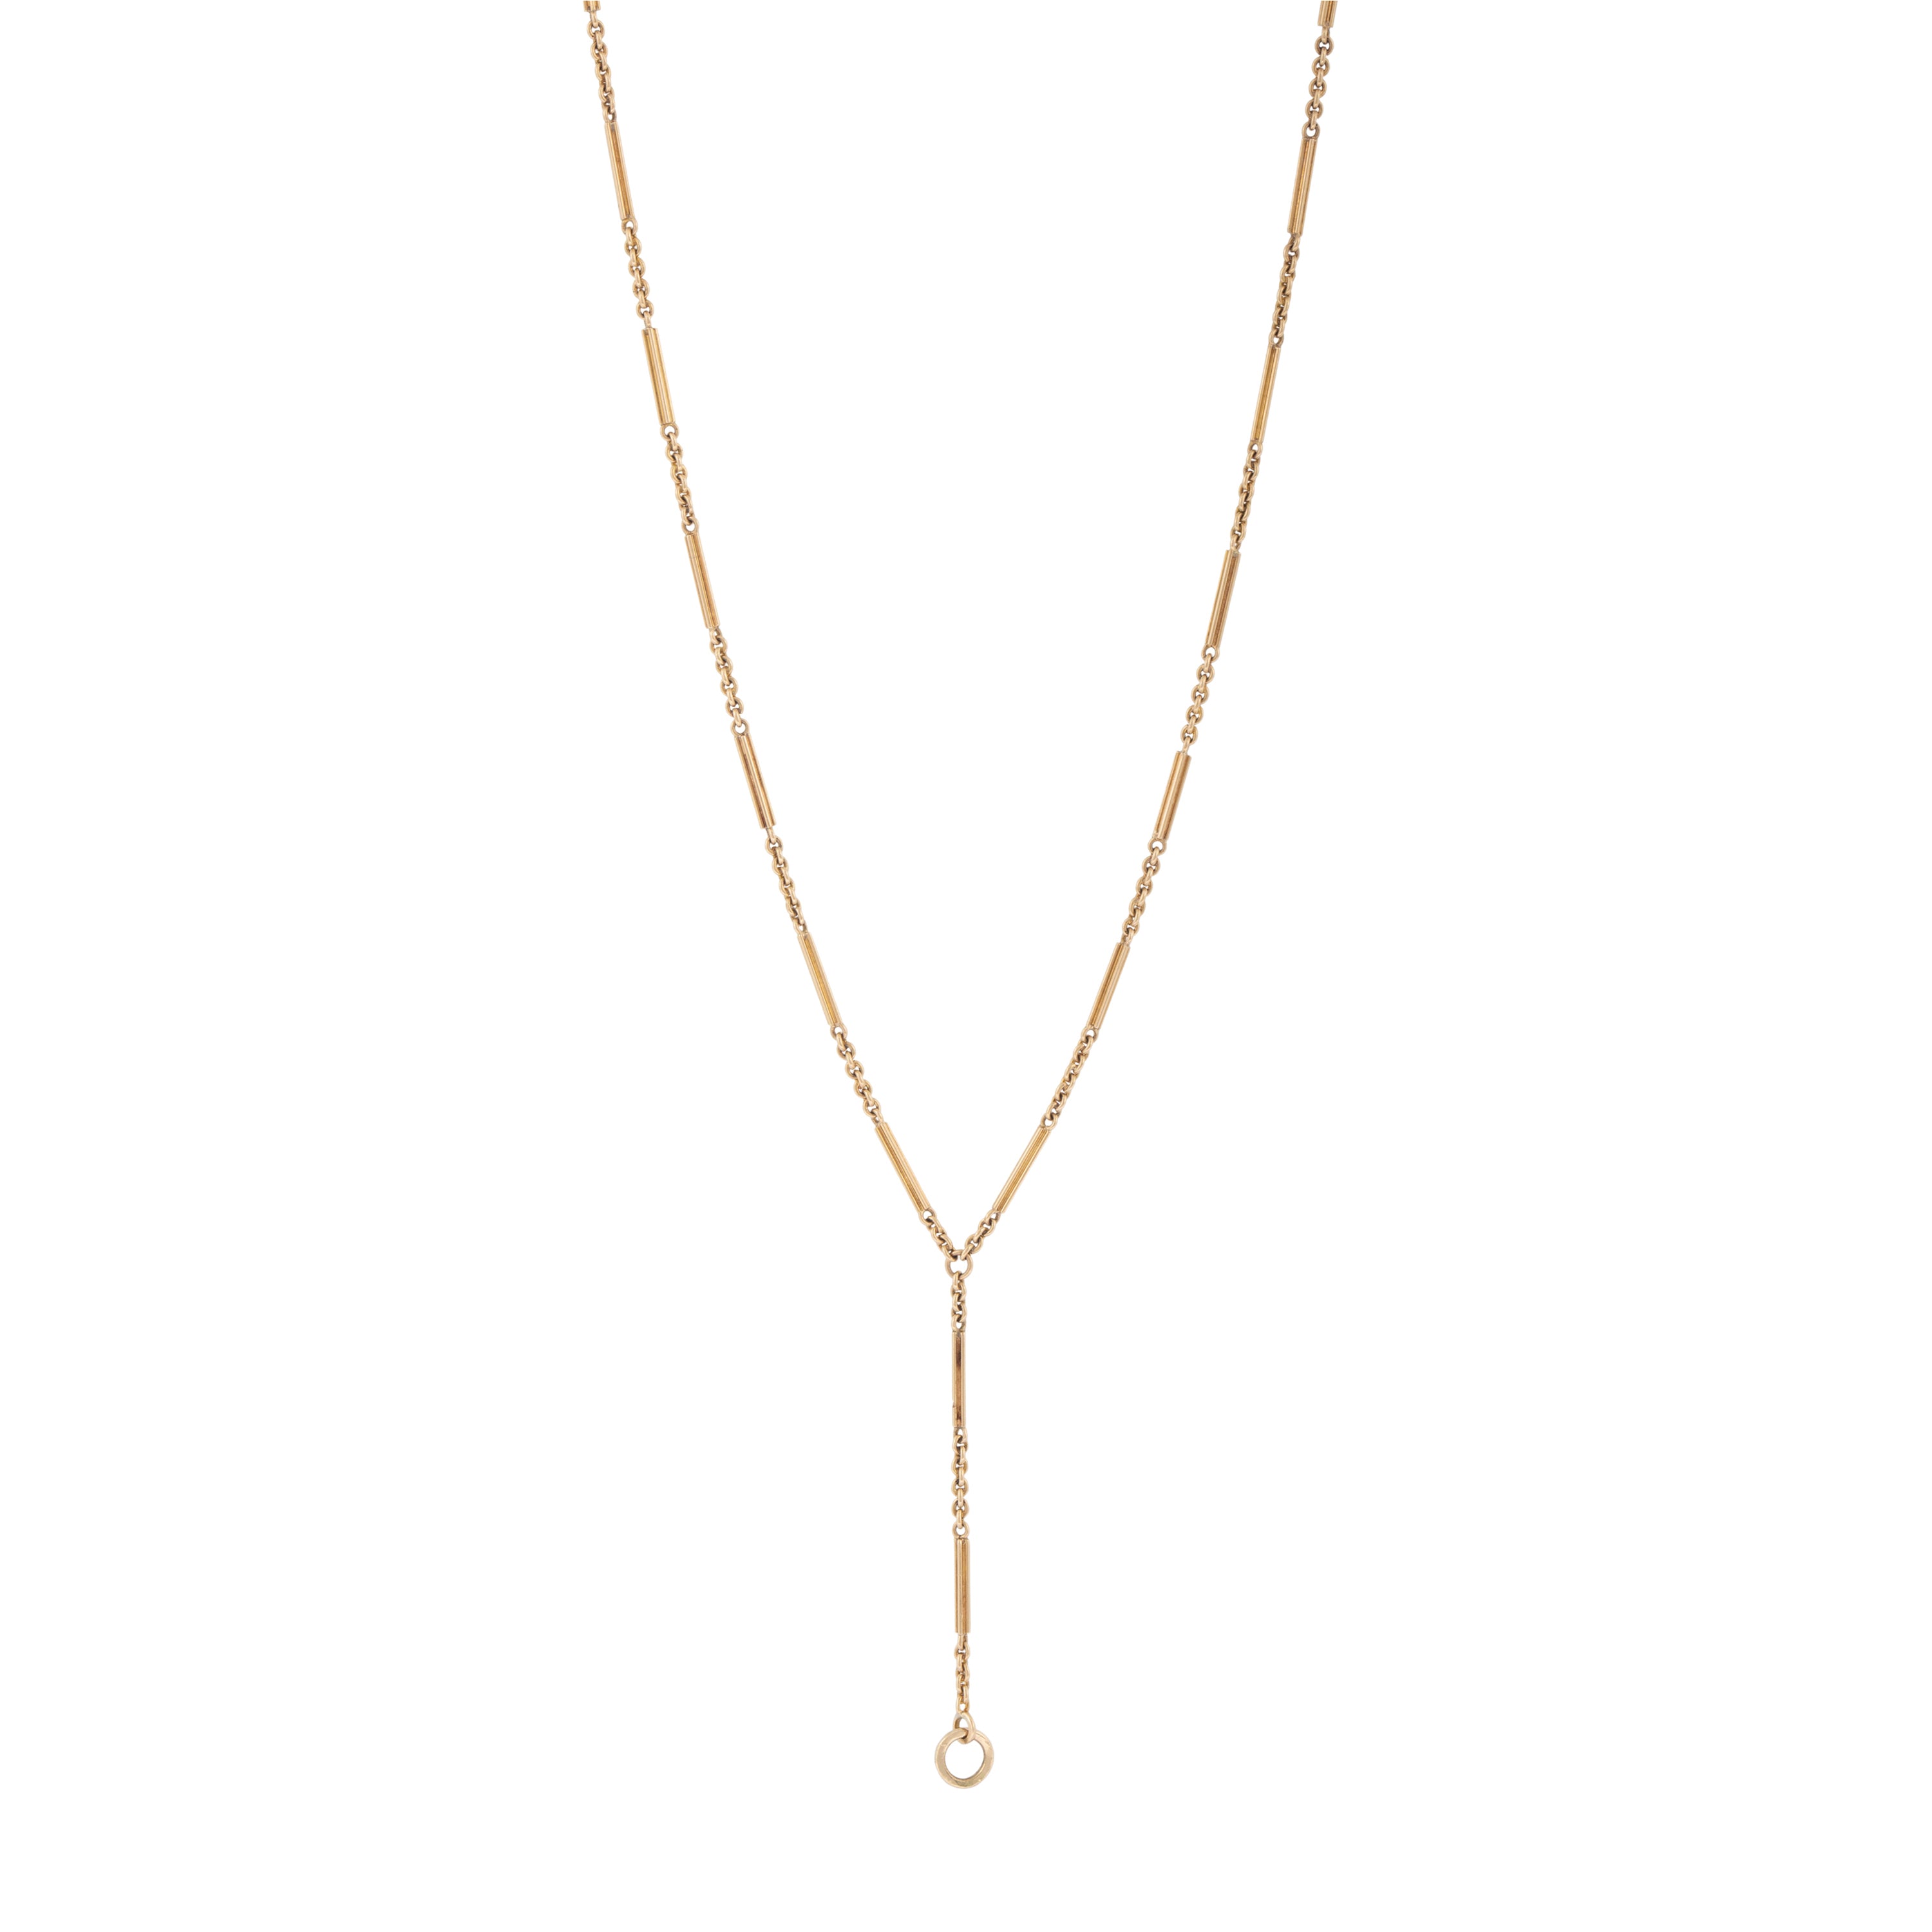 Edwardian Extra Long 18k Gold Chain Necklace